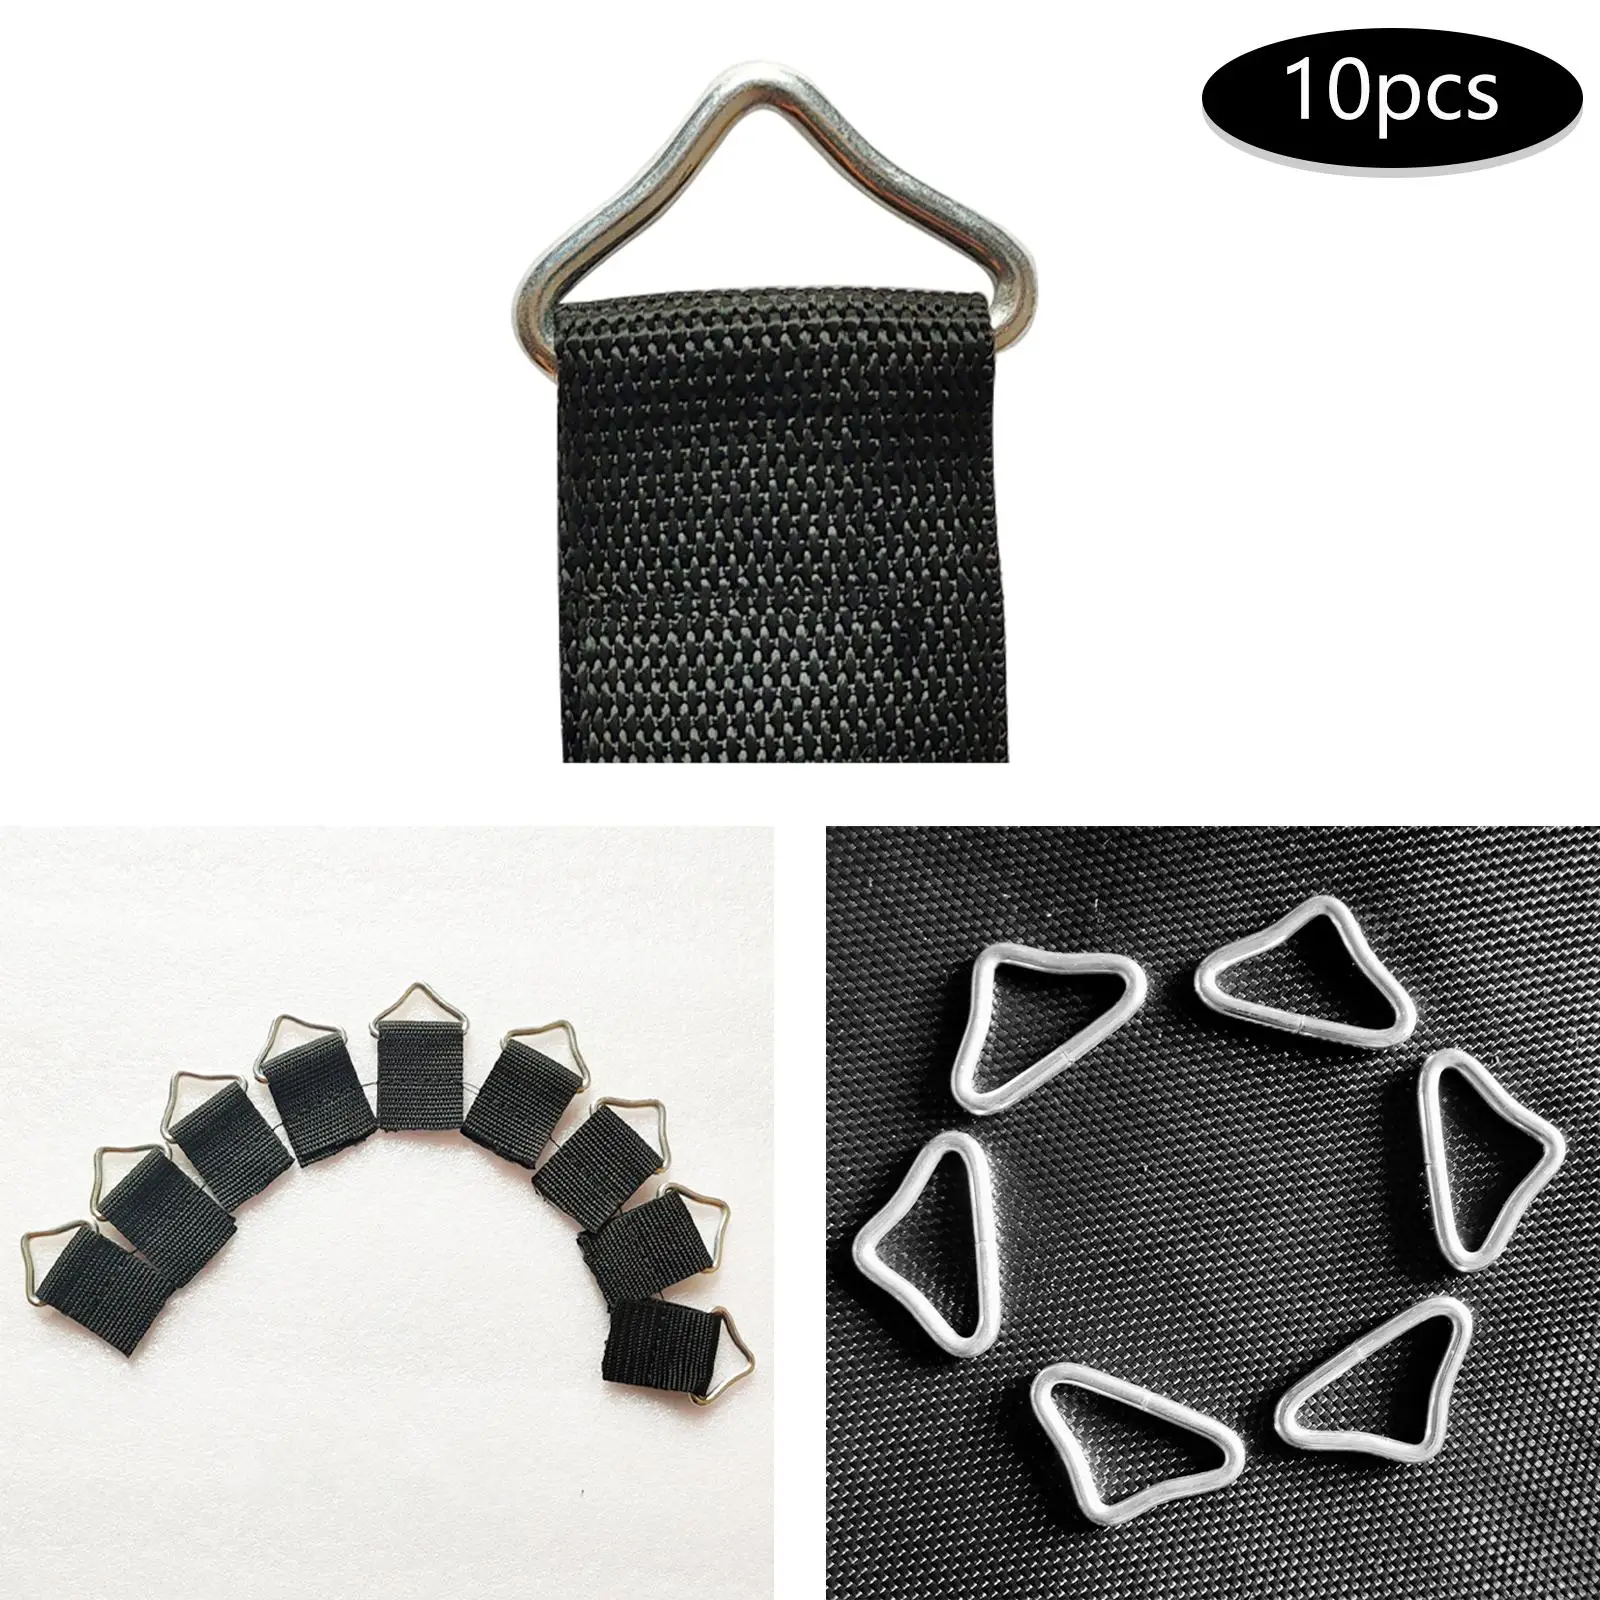 10 Pieces Triangle Buckle Spring Buckles Accessories Connectors Replacements V